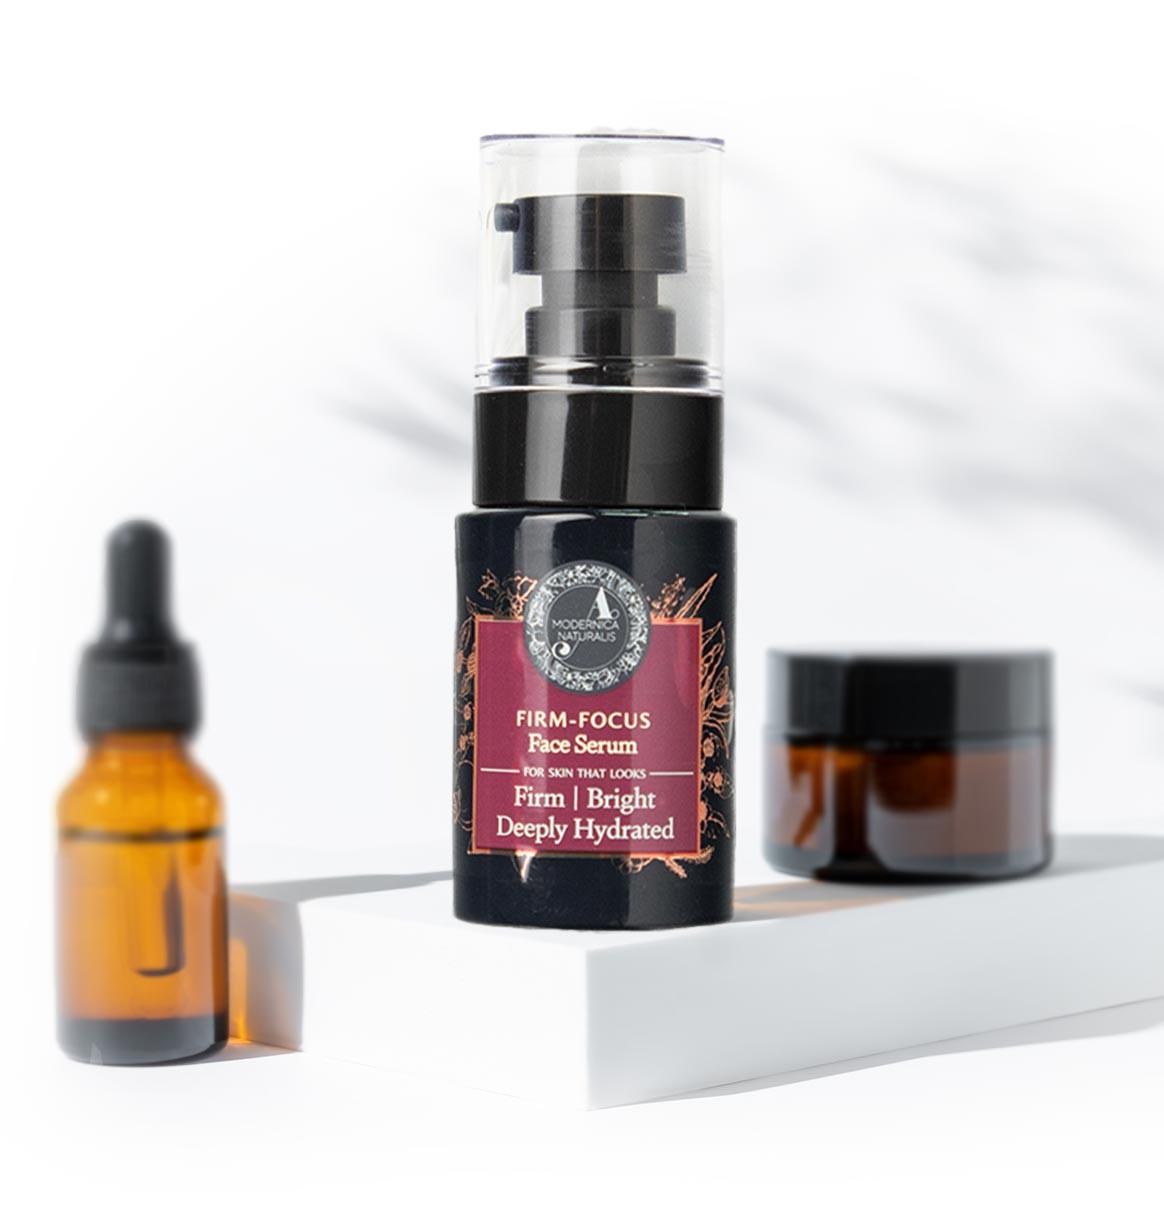 a comparative image of Firm-Focus Face Serum and blurry image of other brands' products in the background